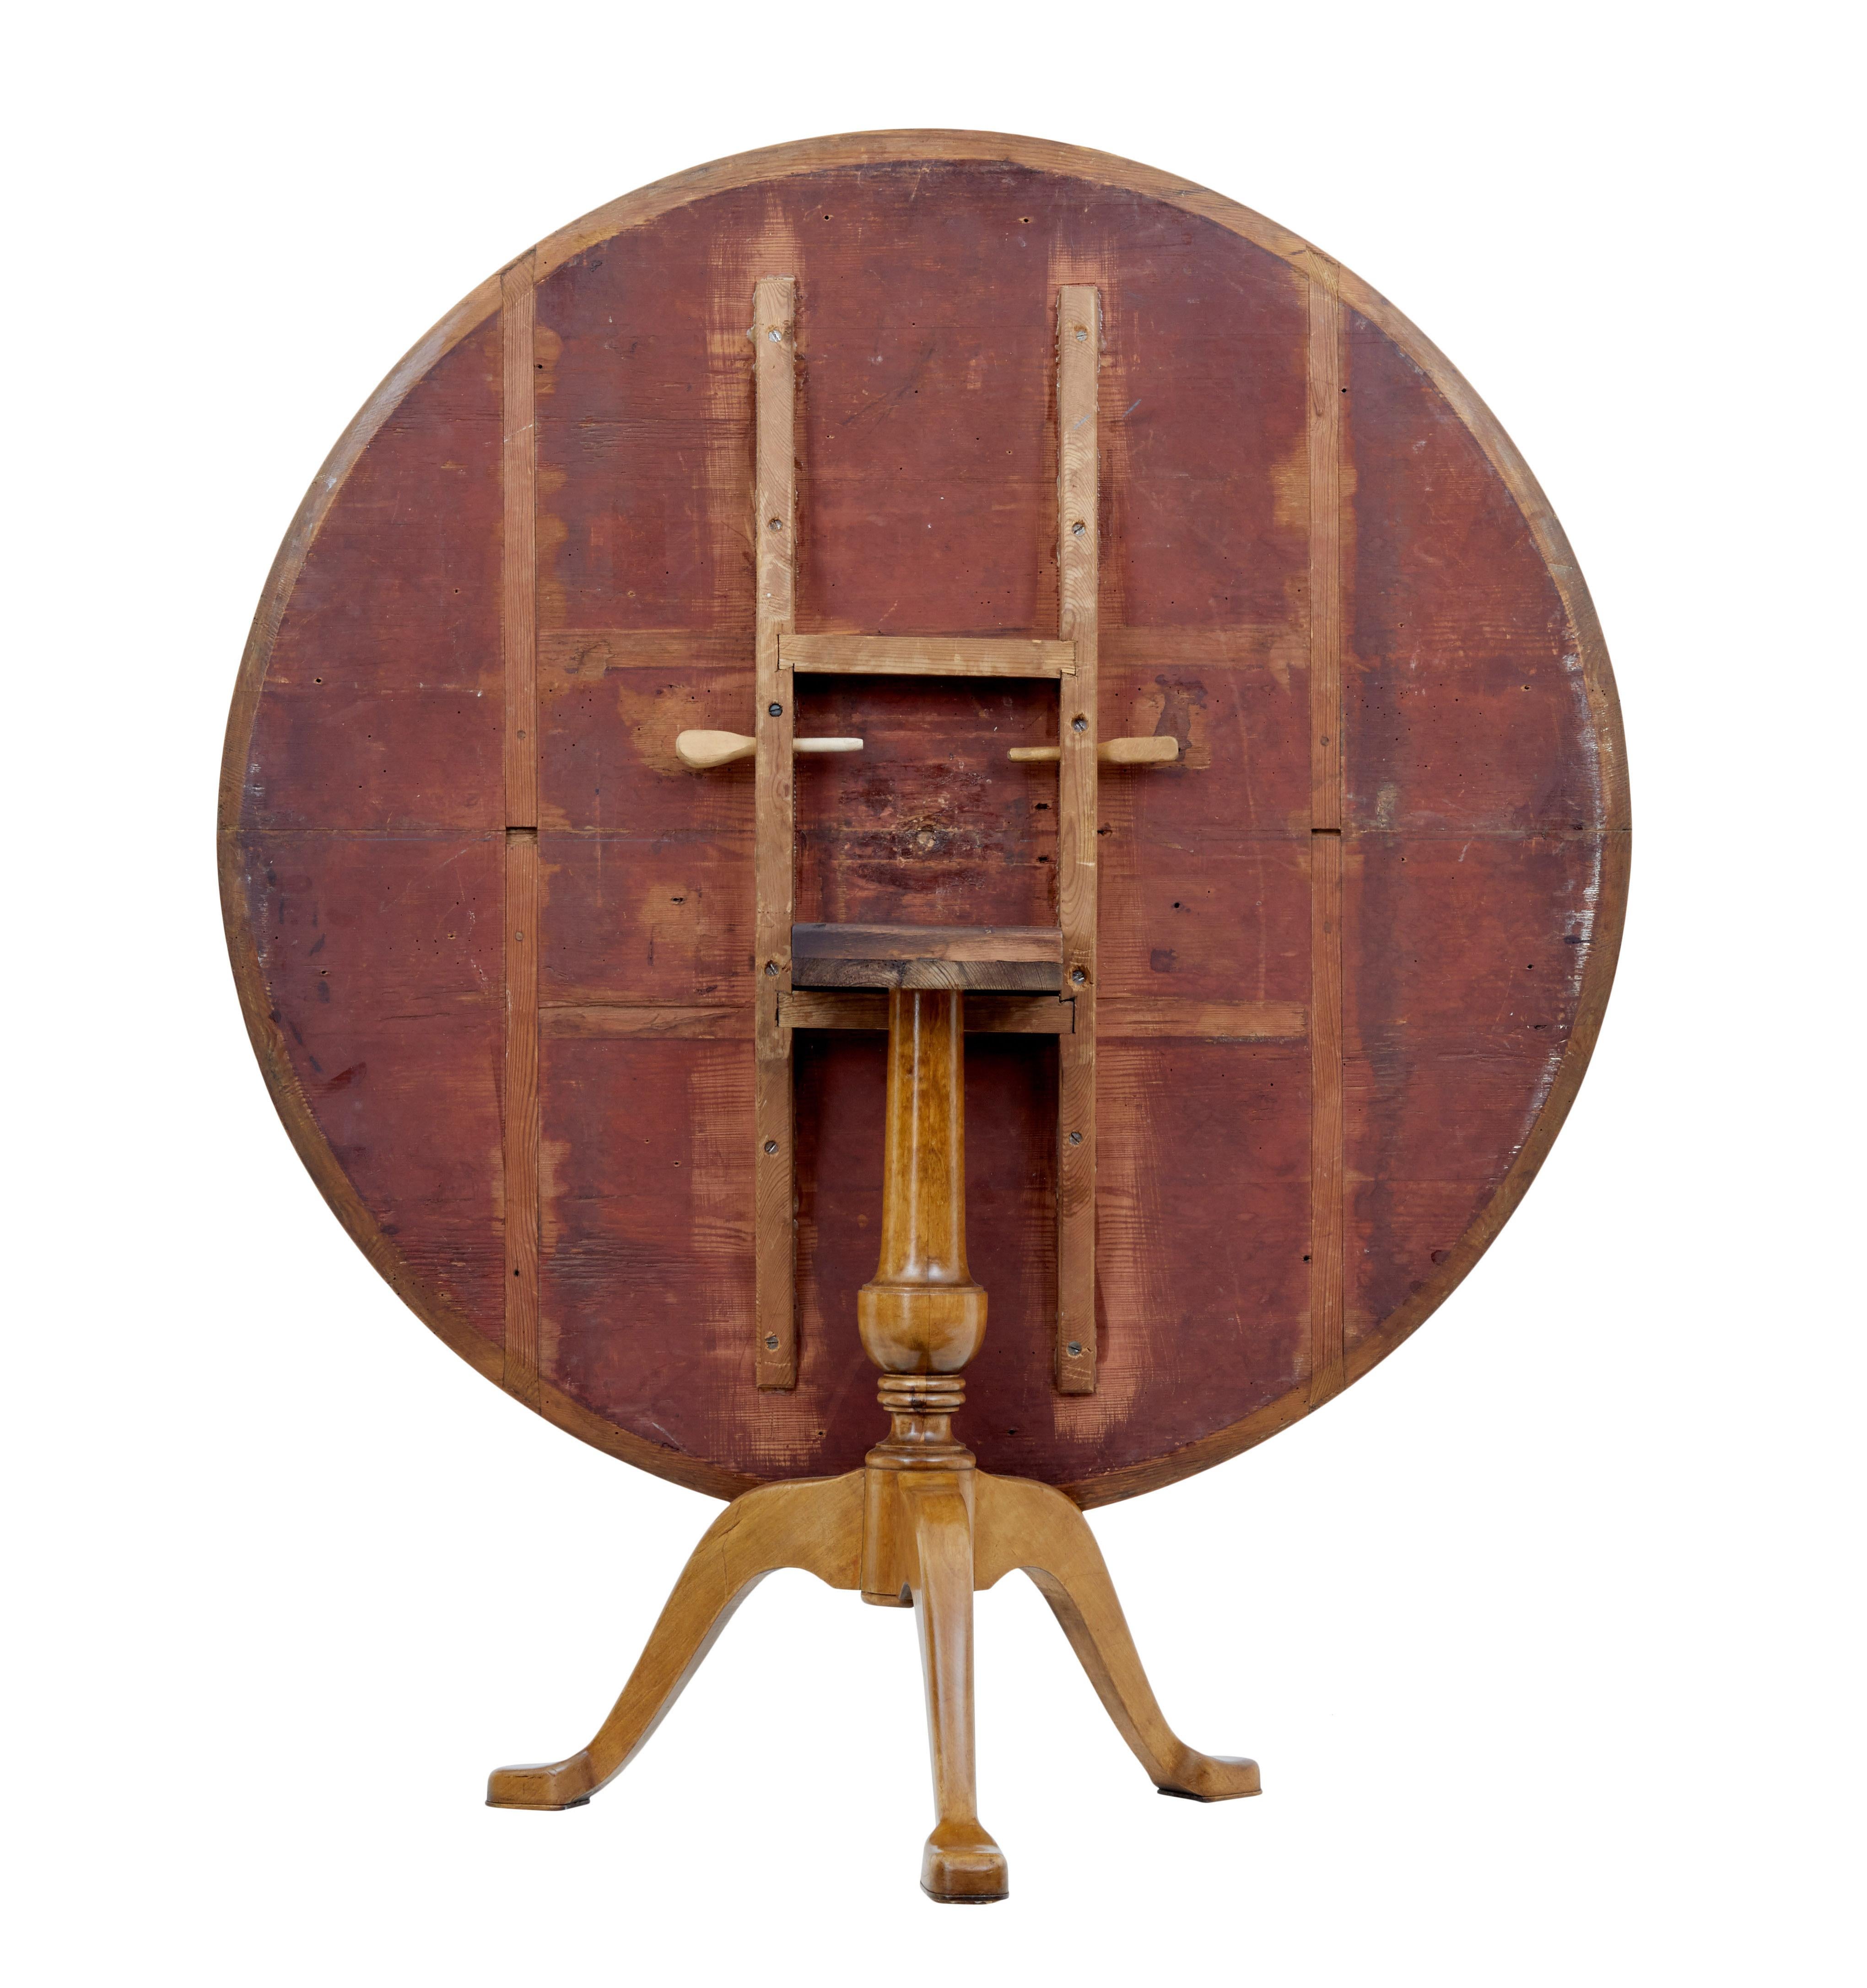 Circular tilt-top table, circa 1880.

Top using birch root veneers, supported by a turned stem base and standing on a tripod base and pad foot.

Minor surface marks, slight natural warping to top.